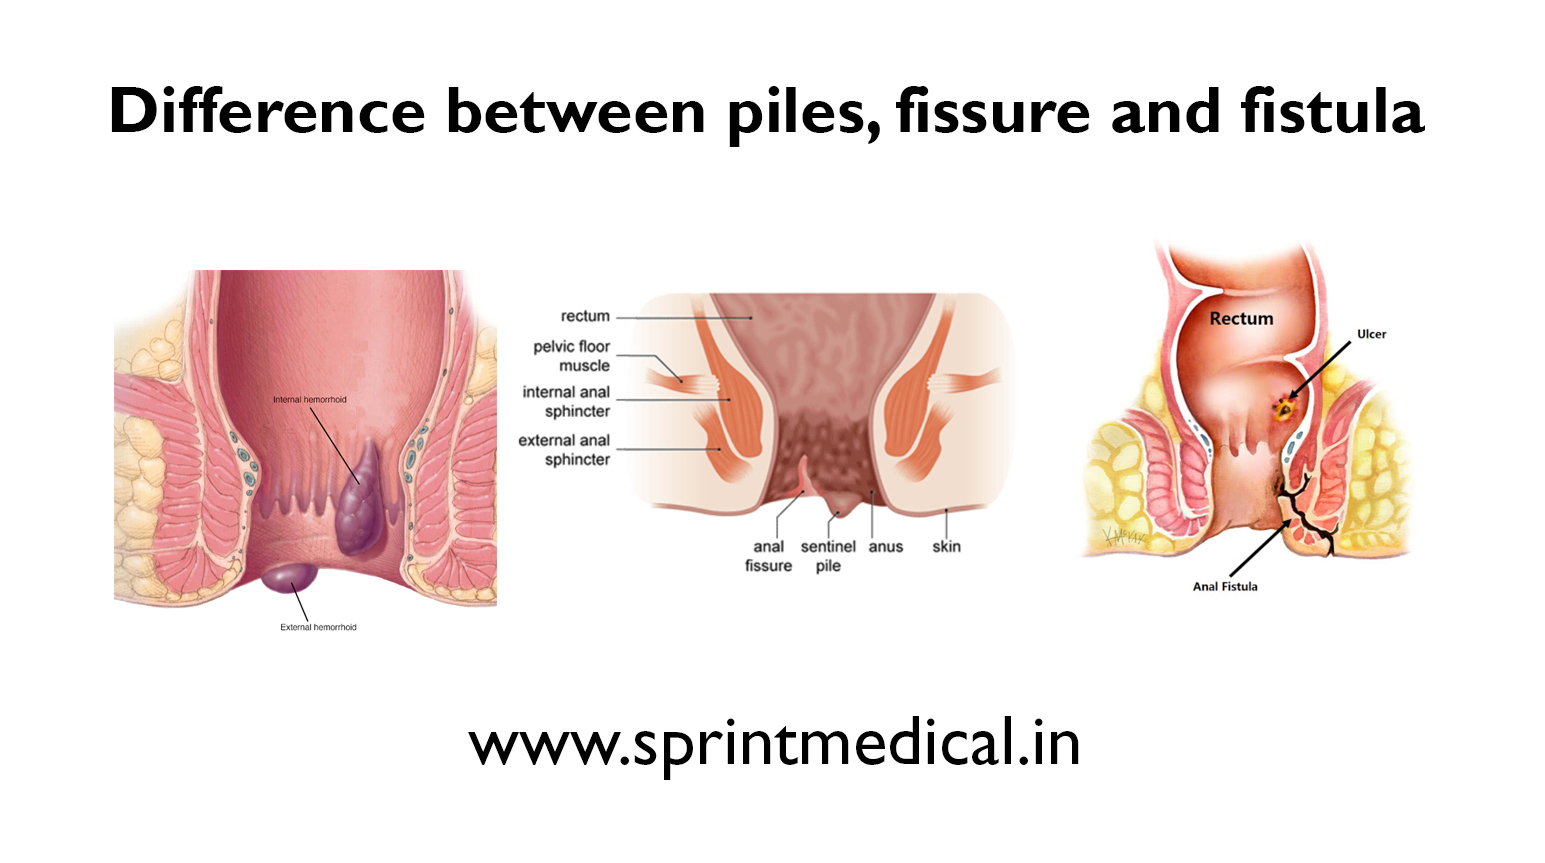 Difference between Piles and Fissure